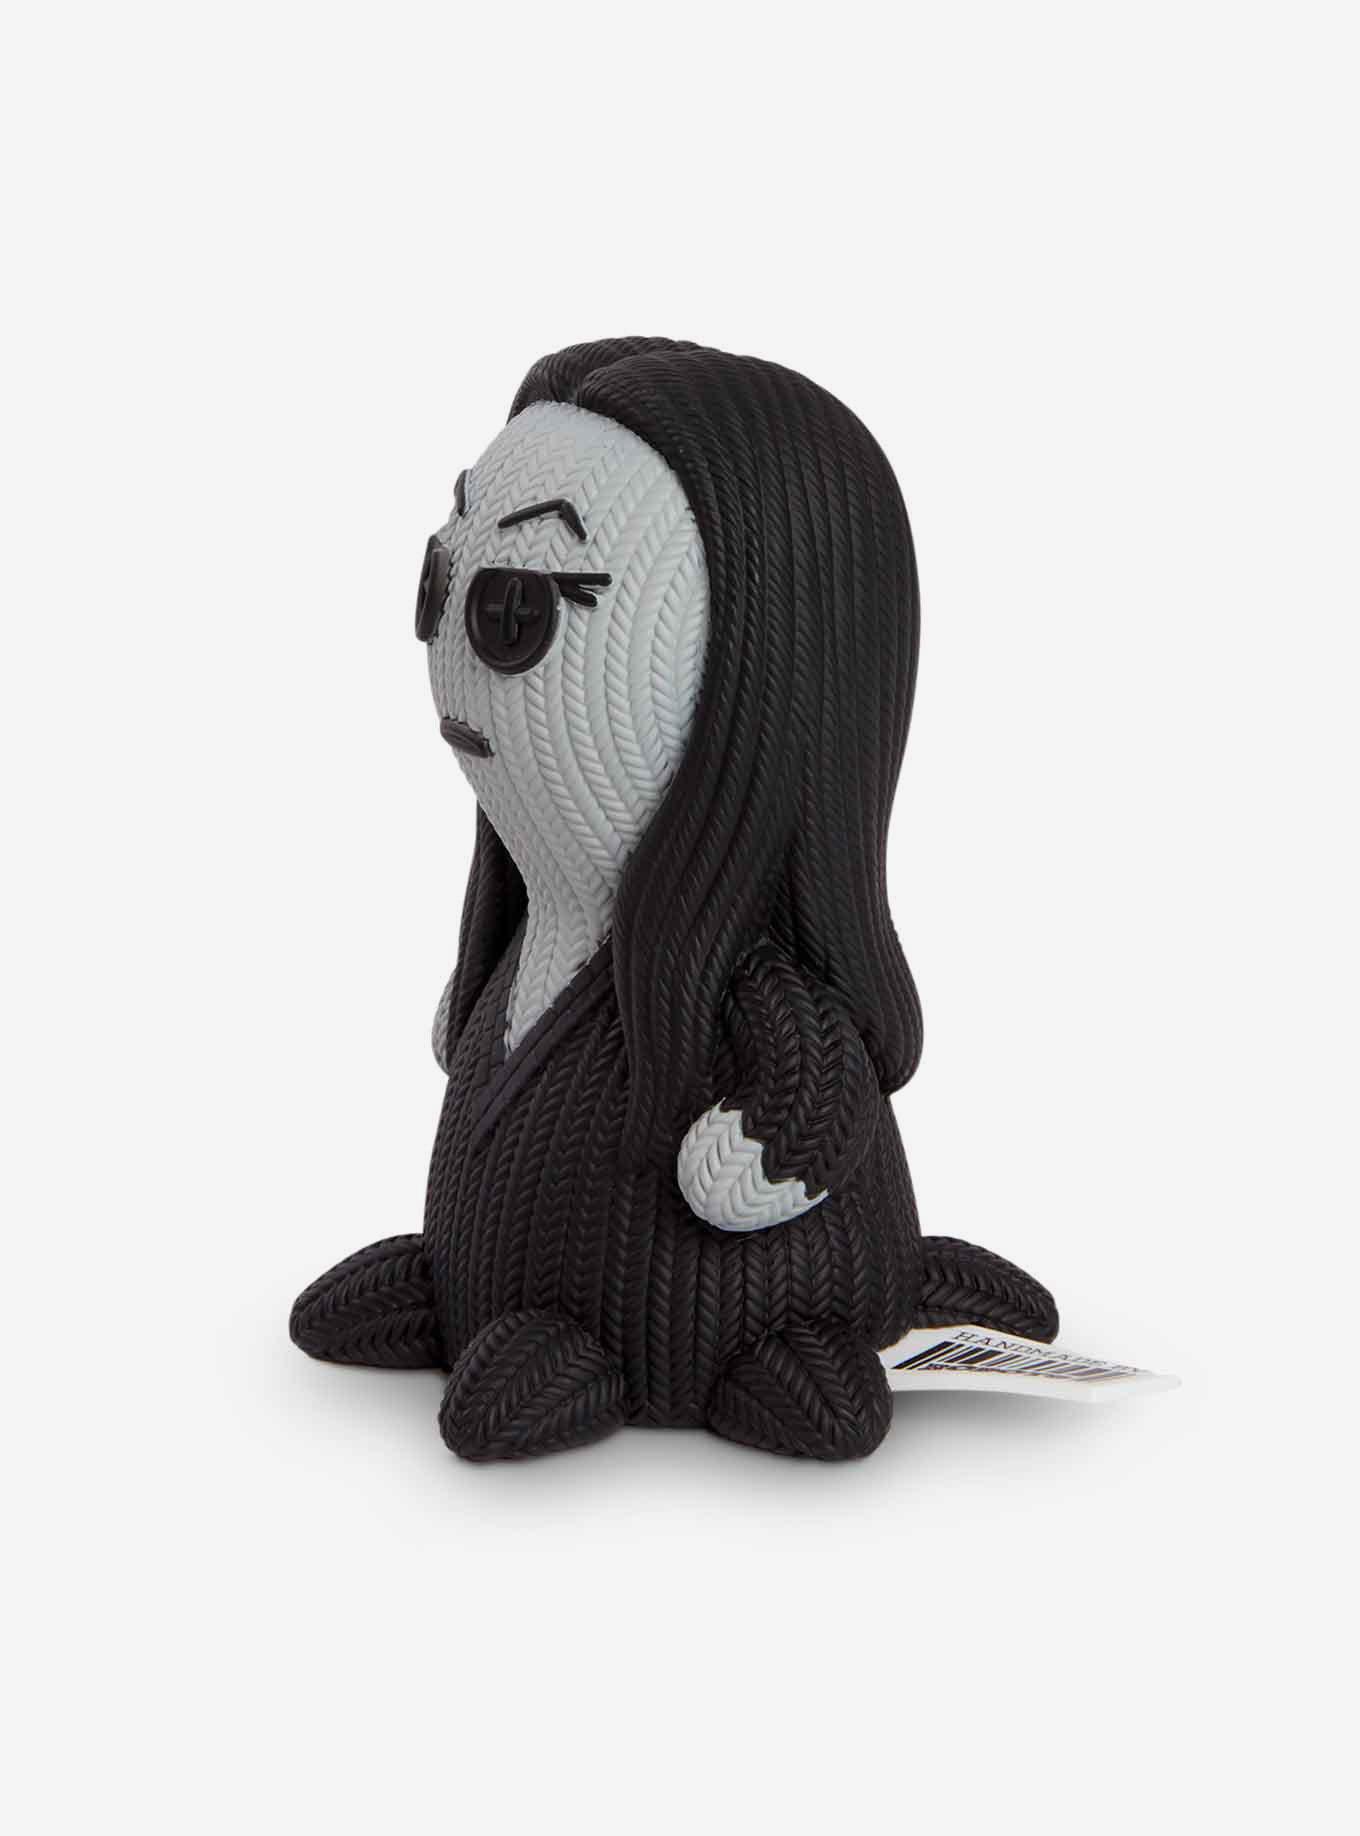 Handmade By Robots The Addams Family Knit Series Morticia Vinyl Figure, , alternate